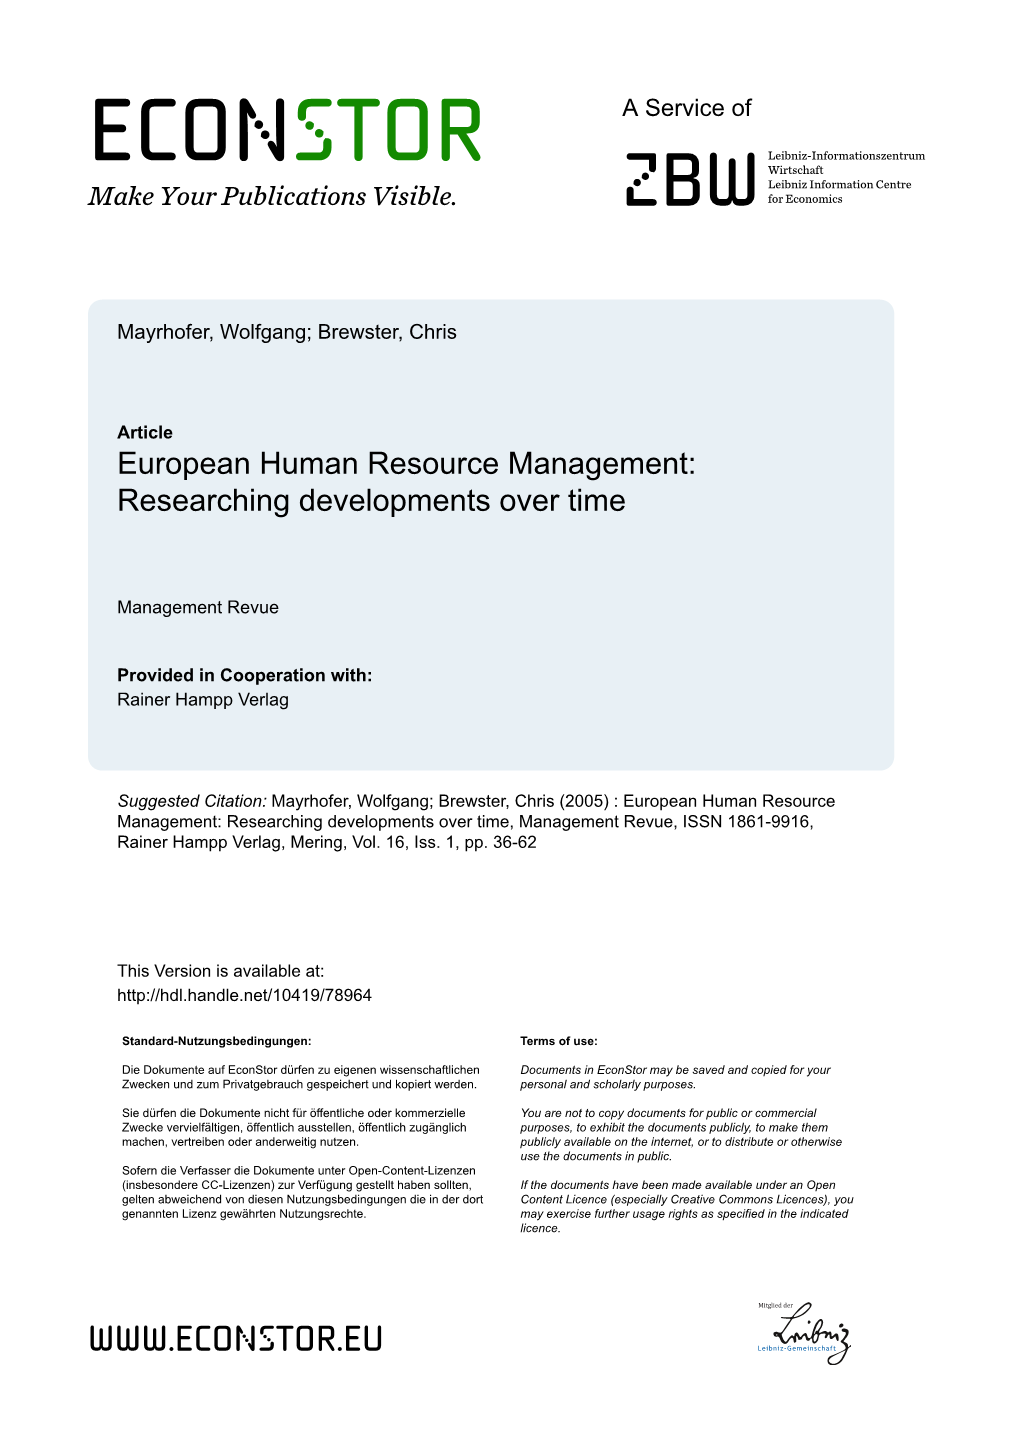 European Human Resource Management: Researching Developments Over Time